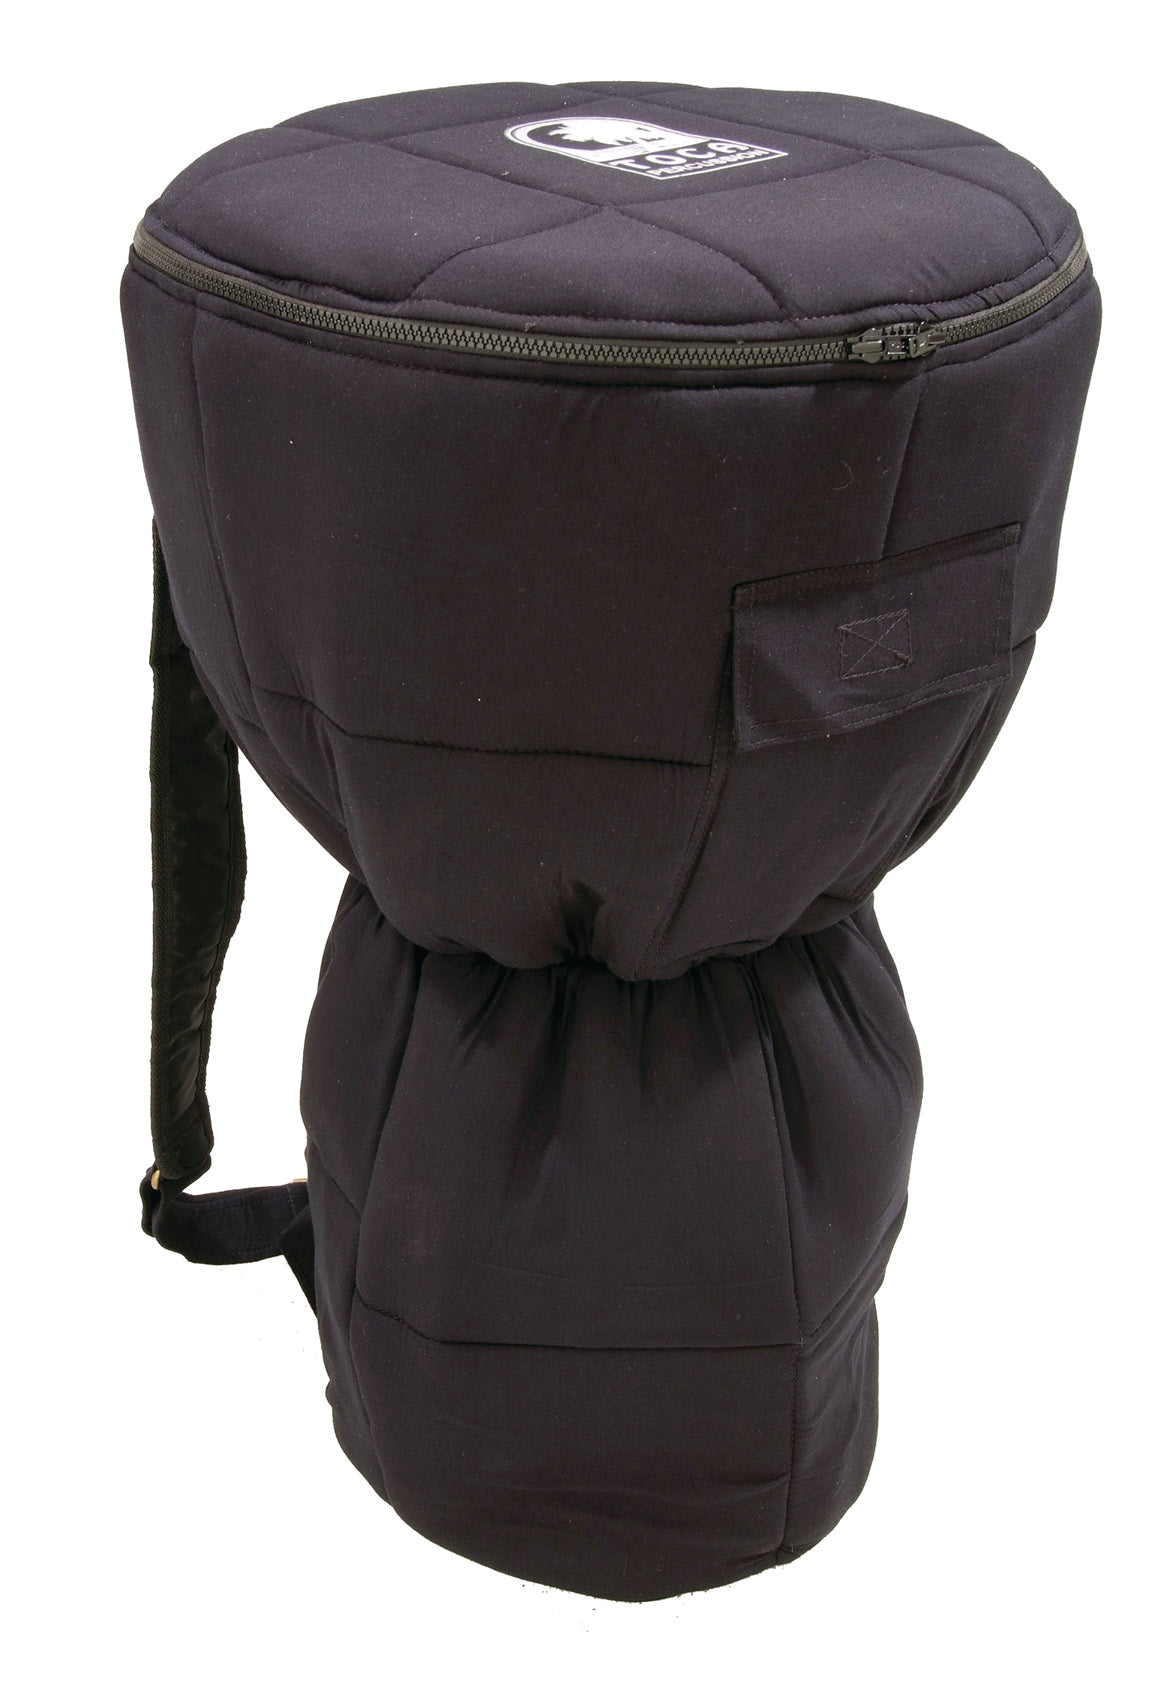 Toca 13" Djembe Bag with Carry All Strap Kit